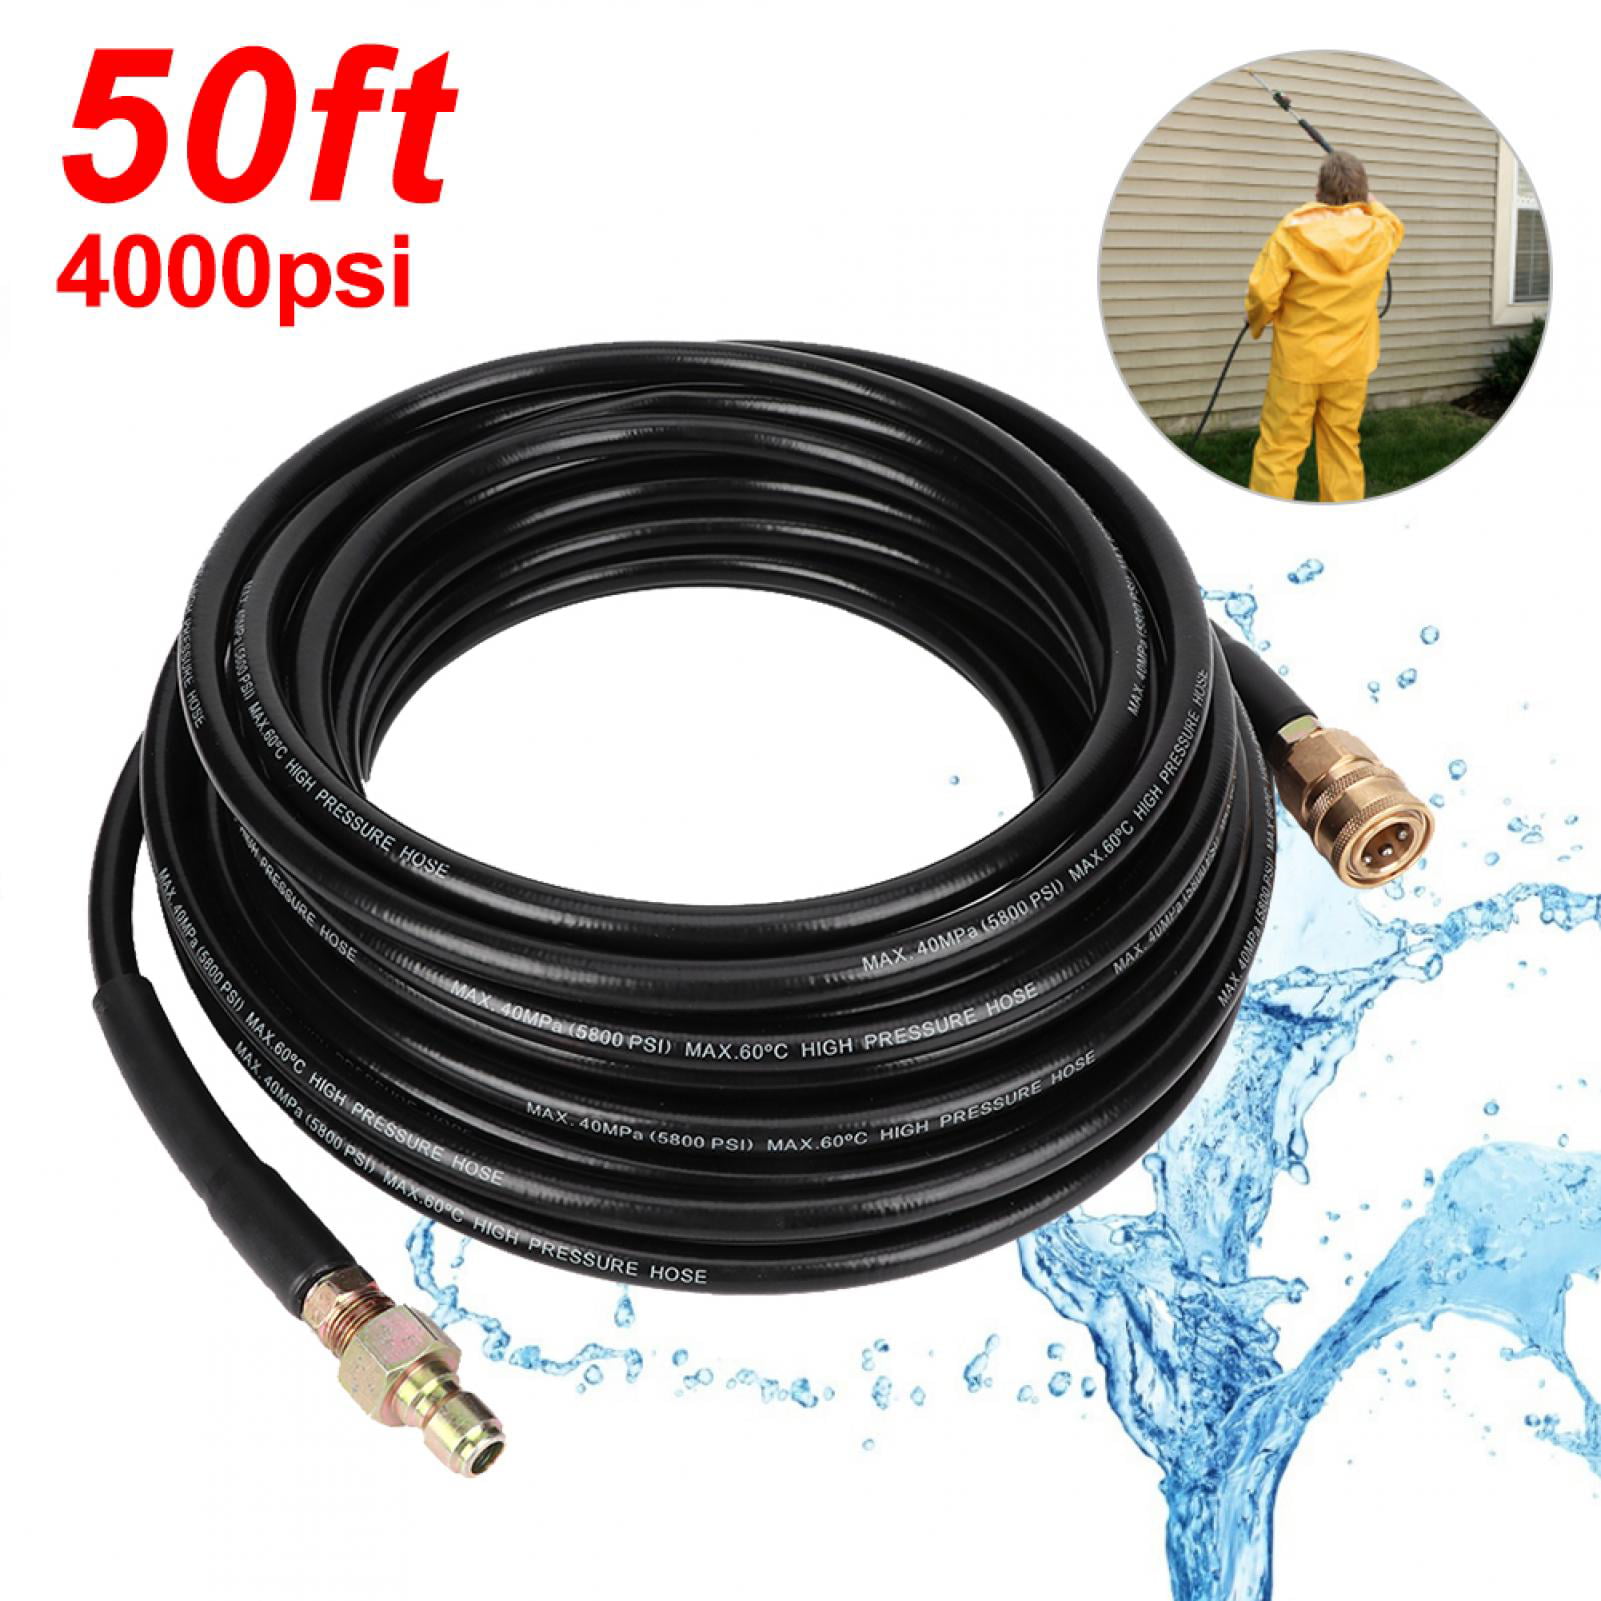 15M Cleaning Machine High Pressure Washer Hose Tube Pipe 3/8" Quick Connect 50ft 